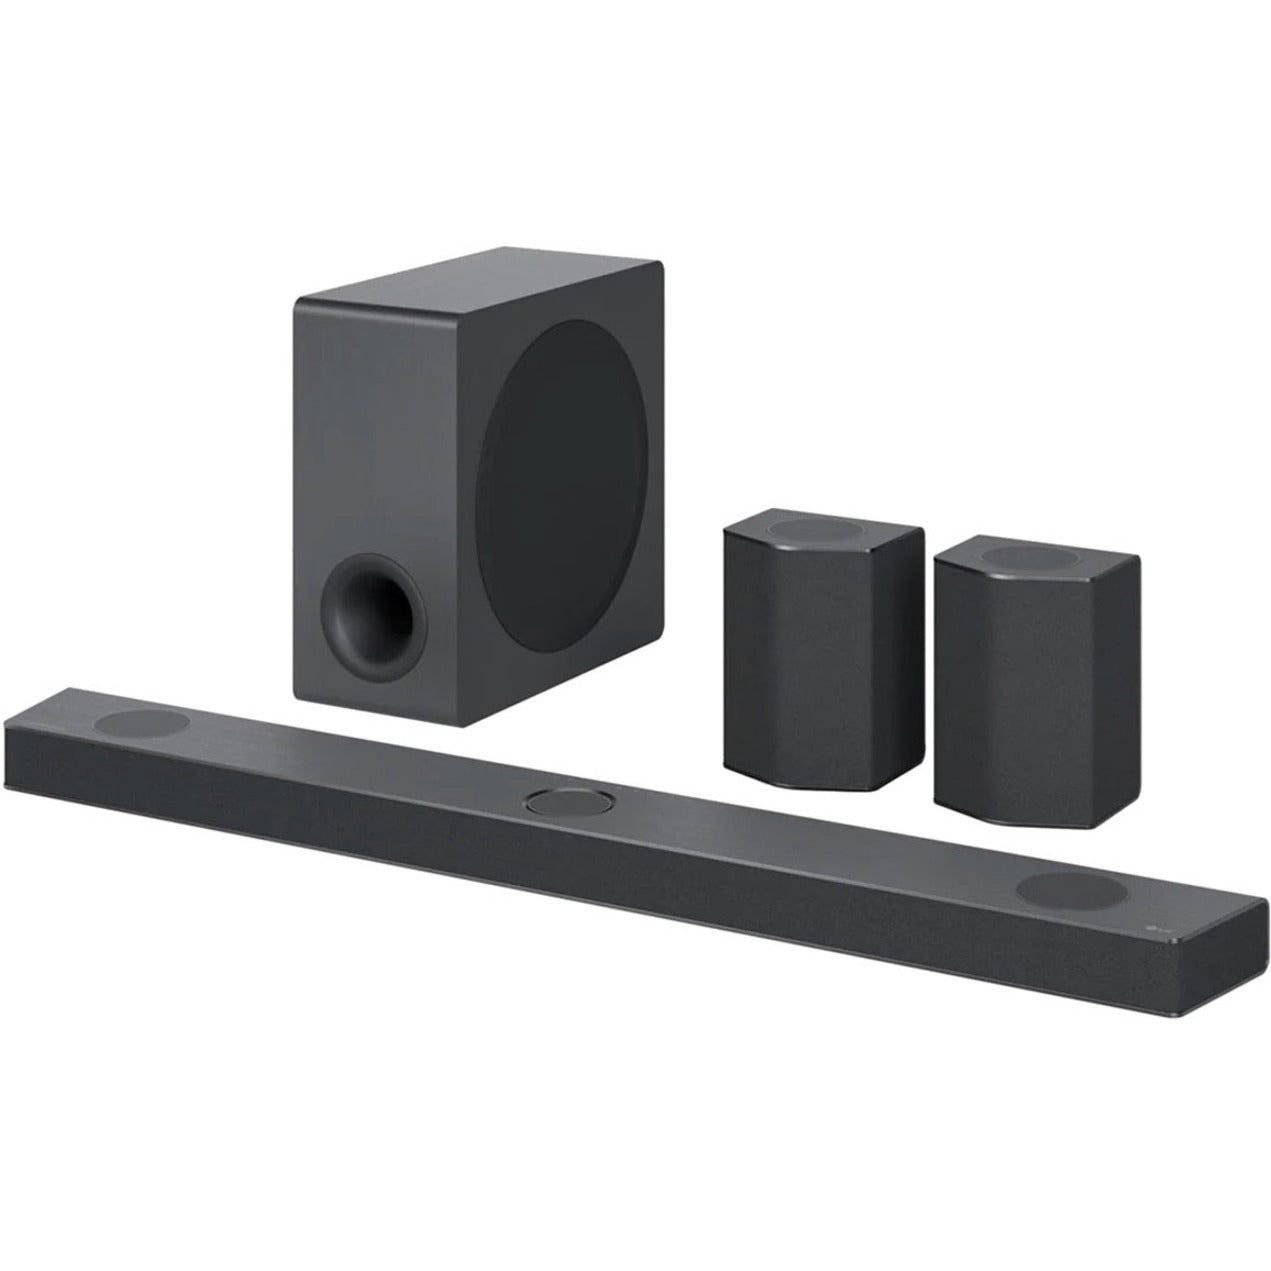 LG S95QR Sound Bar Speaker, 9.1.5 Channel with Wireless Subwoofer, Dolby Atmos and DTS:X, Black